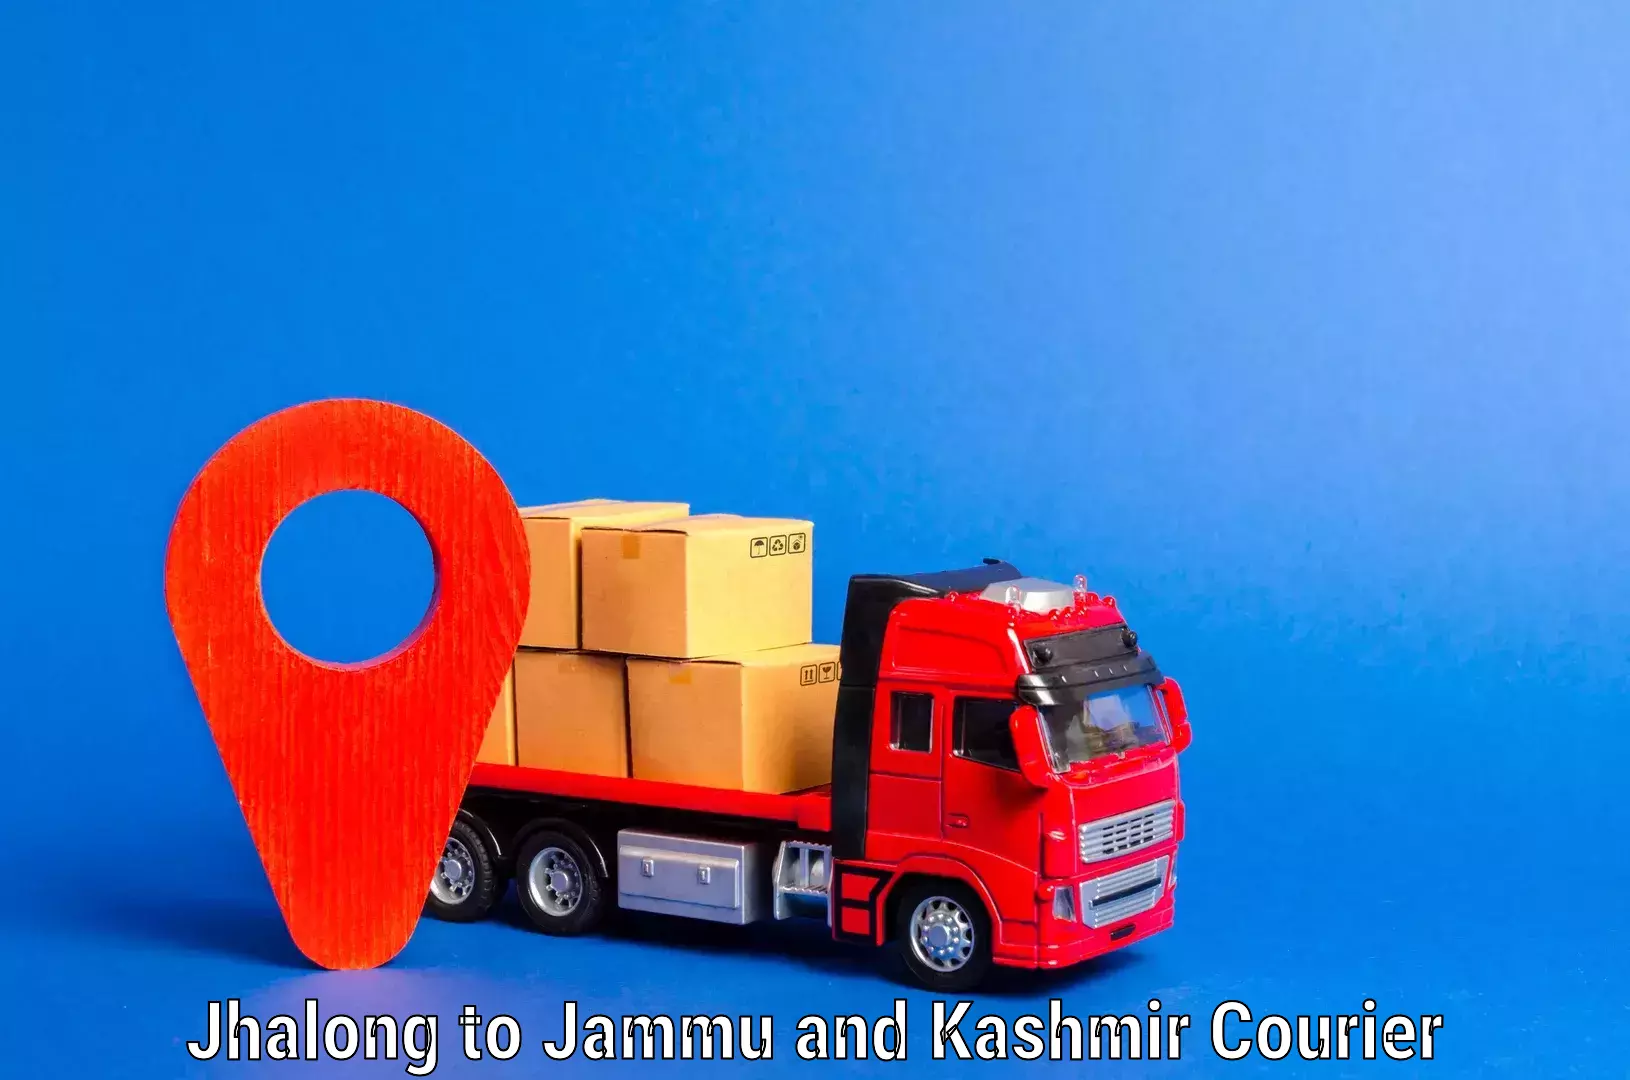 Furniture transport experts in Jhalong to Jammu and Kashmir